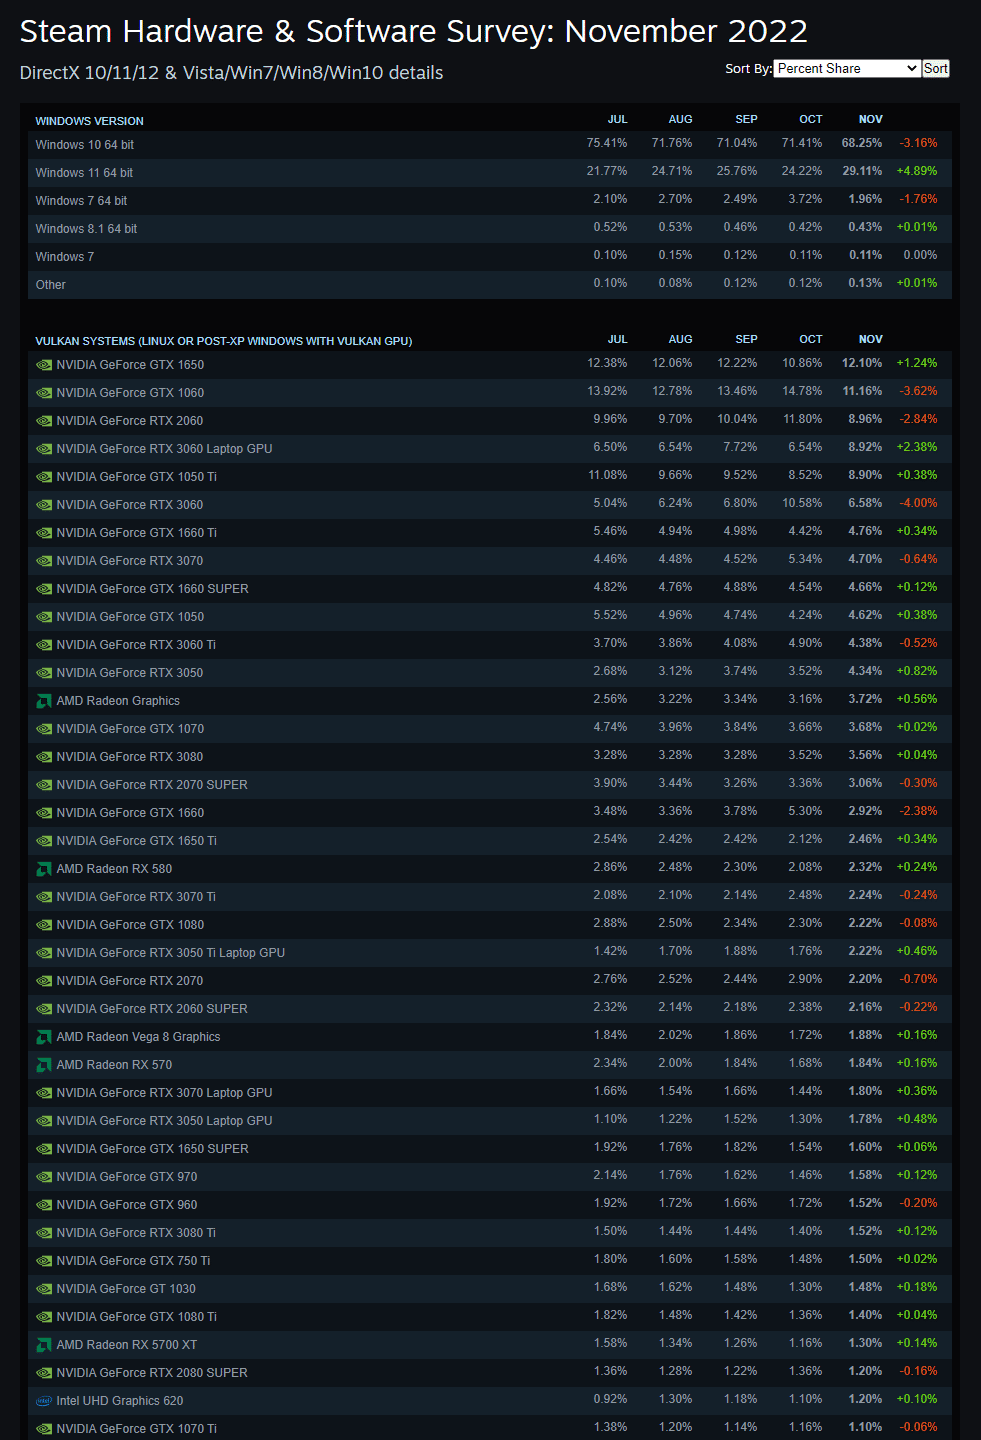 NVIDIA GeForce GTX 1060 Finally Loses Top Spot in Steam Hardware Survey 25